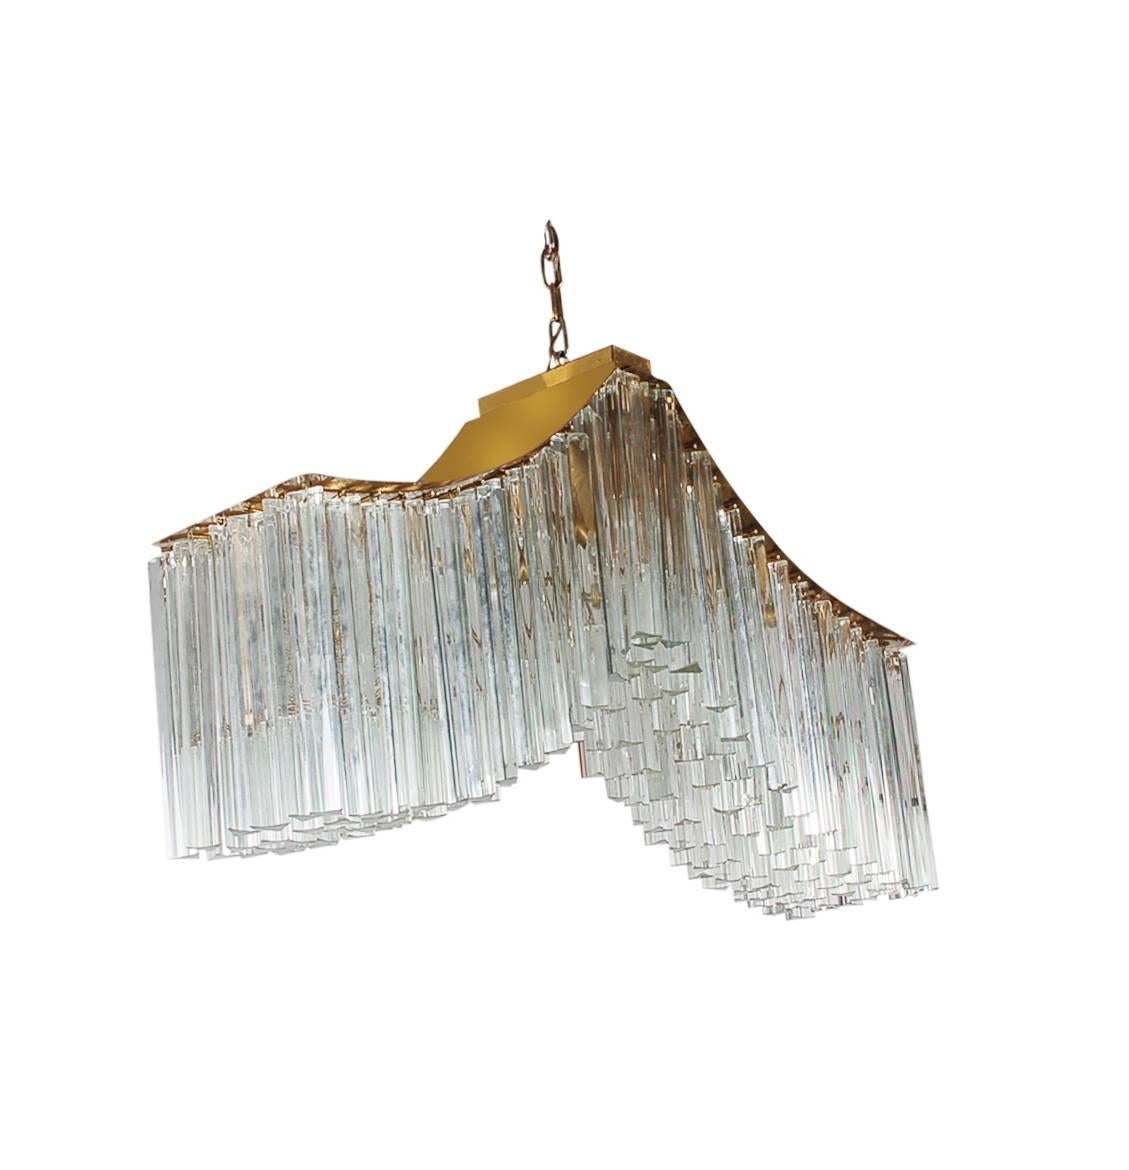 An incredibly stunning Italian chandelier in the shape of a whale tail. It features brass framing and nearly 200 glass prisms. Tested and fully working.